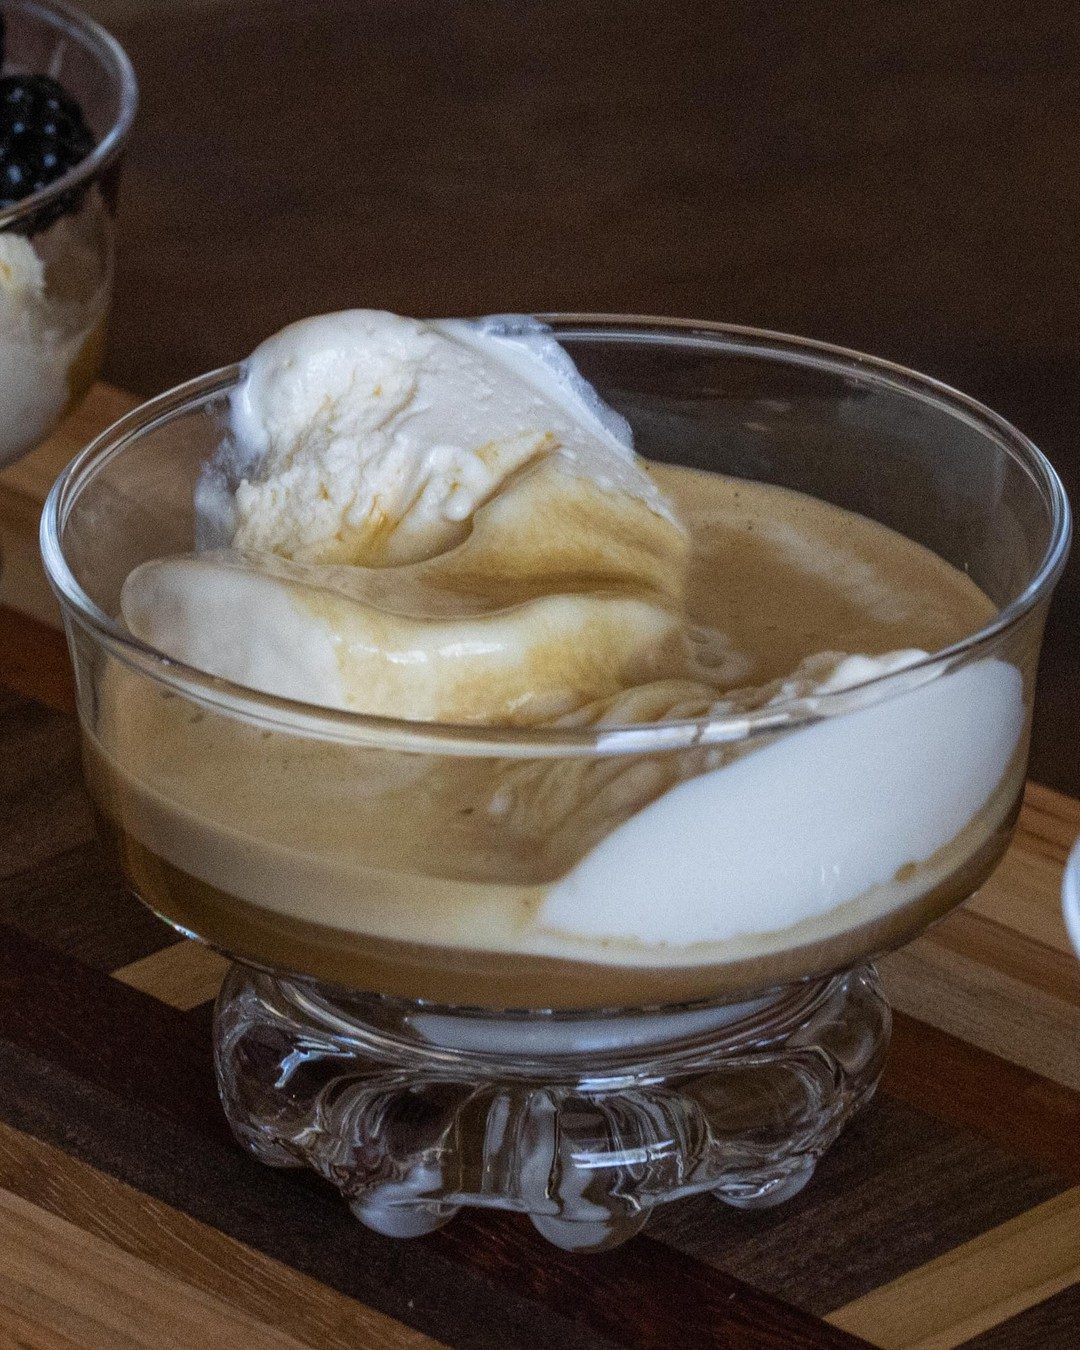 AFFOGATO AL CAFFEE​​​​​​​​
Affogato al Caffe. A delightful and super easy dessert to make.​​​​​​​​
​​​​​​​​
Perfect at any time of the day and year, this Italian dessert has been gracing our lips with delight for years. Steaming hot Italian espresso poured over vanilla ice cream. The ice cream turns into a perfect cream.​​​​​​​​
​​​​​​​​
With each spoonful, you have the cold hot combination that awakens your senses and gives you instantaneous pleasure to your palate.​​​​​​​​
​​​​​​​​
RECIPE 👉 https://www.giangiskitchen.com/recipe/affogato-caffee/​​​​​​​​
.​​​​​​​​
.​​​​​​​​
.​​​​​​​​
.​​​​​​​​
.#affogato #italiandessert #affogatoalcaffe #giangiskitchen #giangitownsend